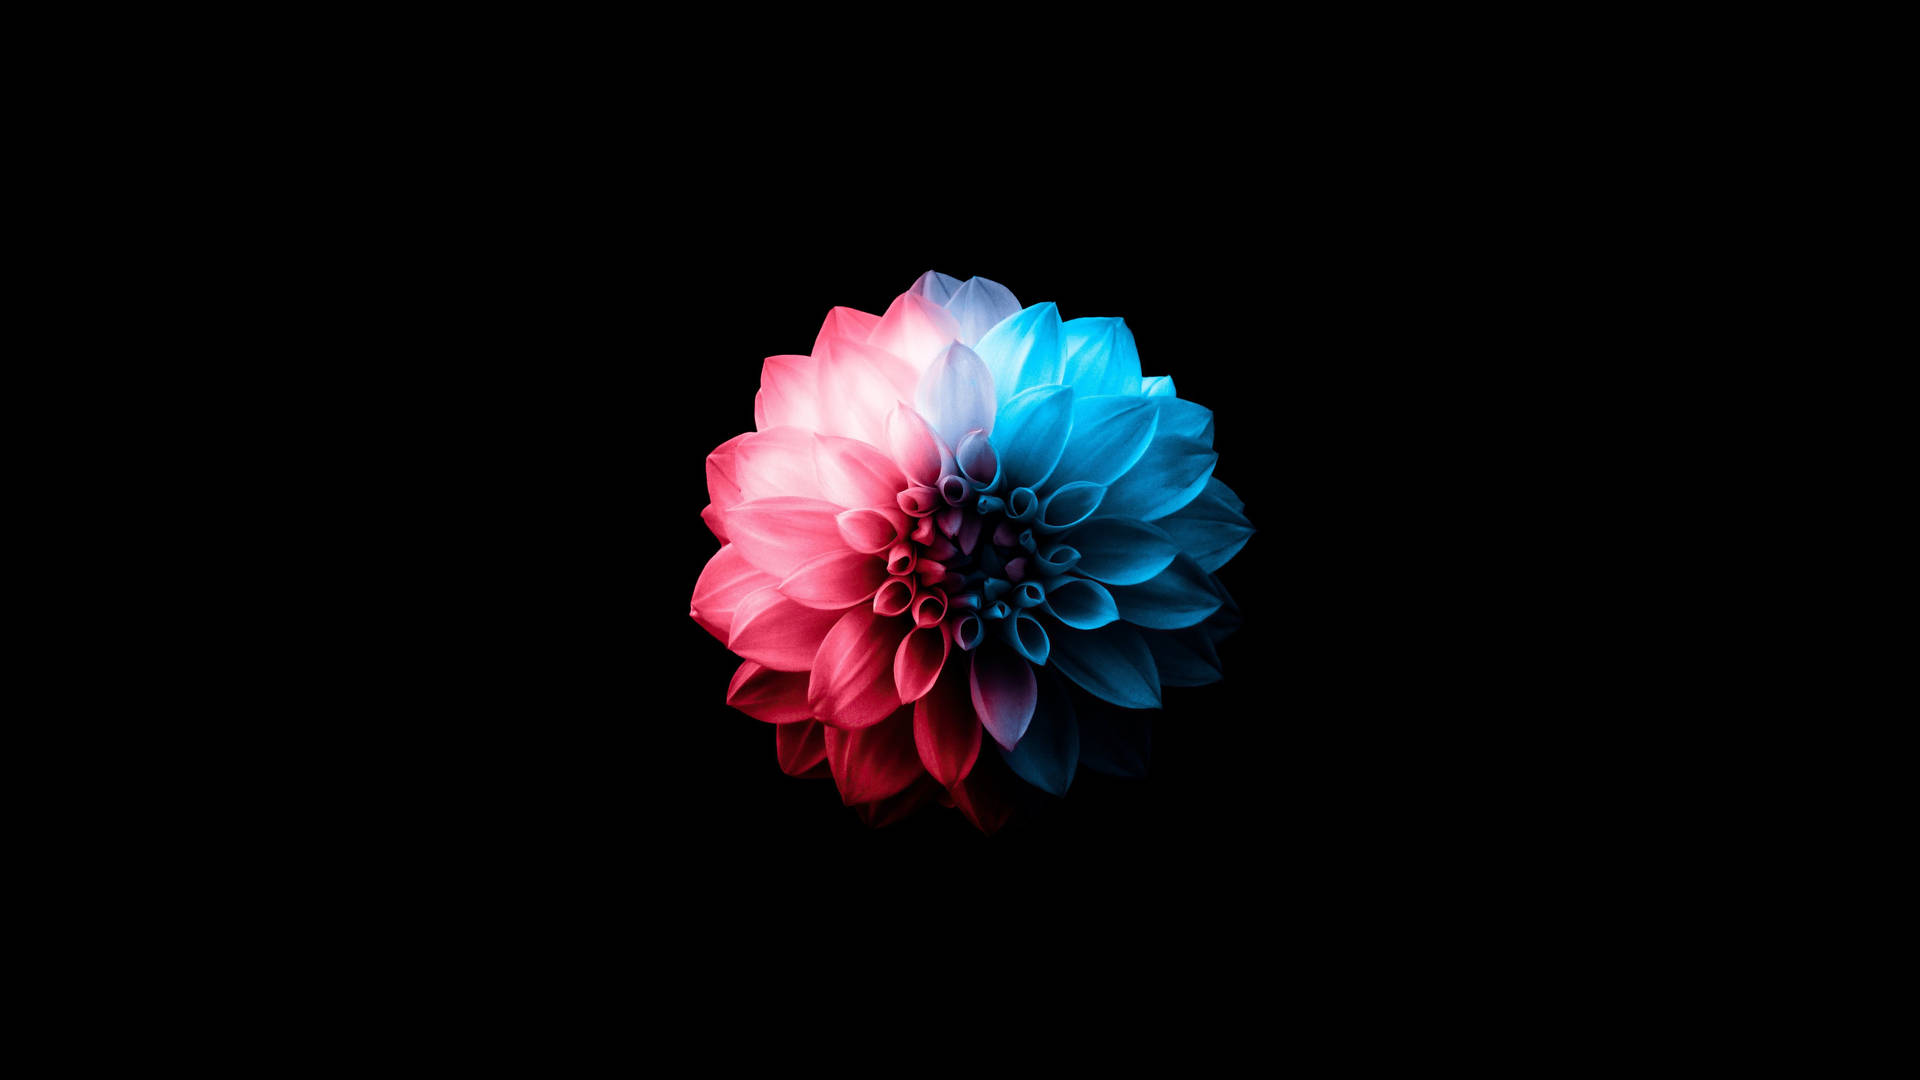 Free Oled 4k Wallpaper Downloads, [100+] Oled 4k Wallpapers for FREE |  